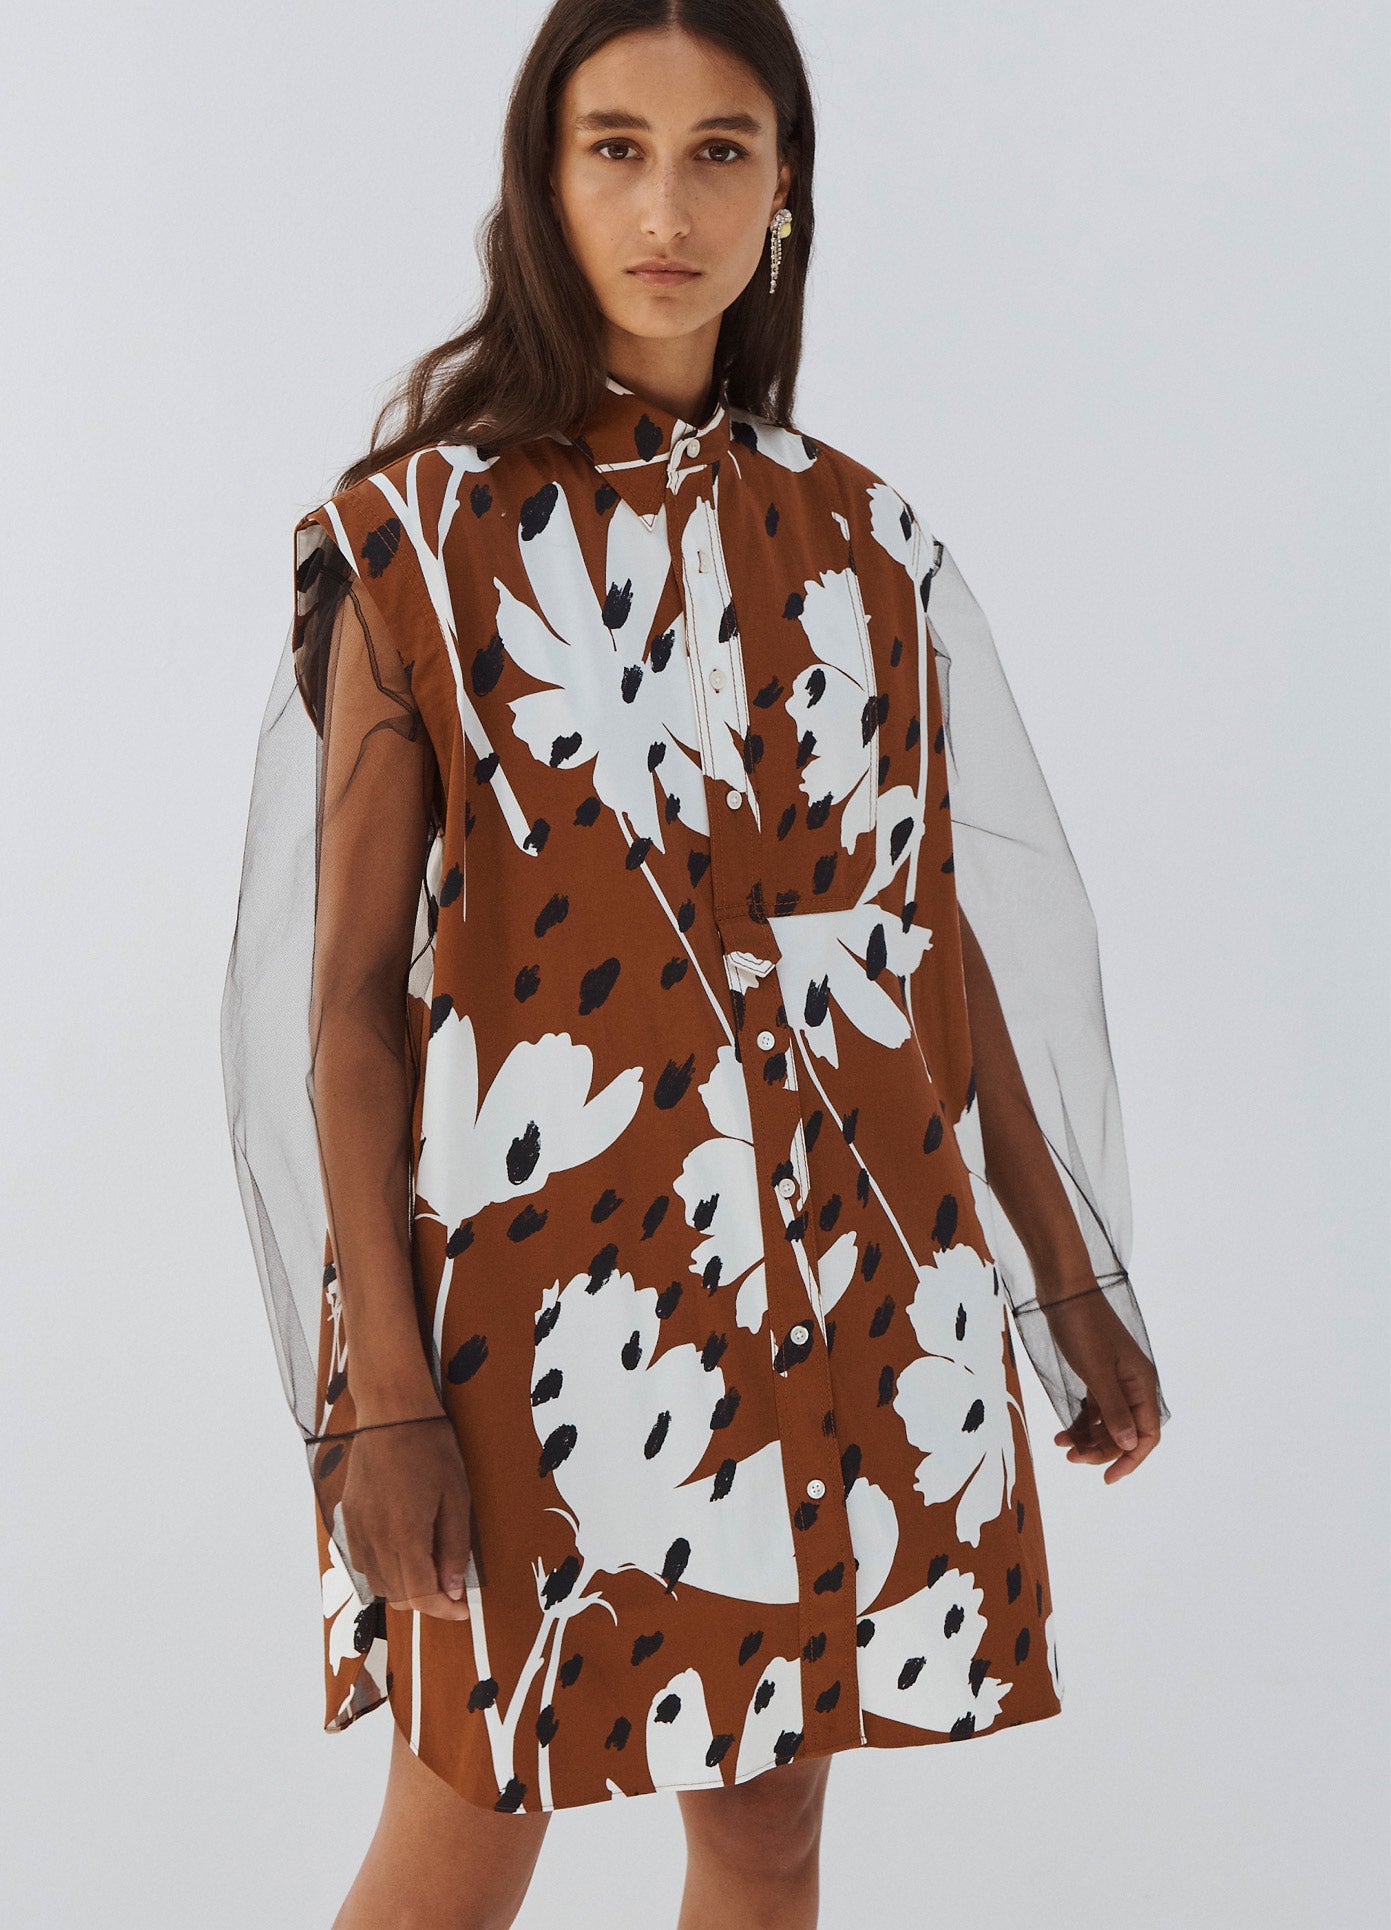 MONSE Asymmetrical Collar Sleeveless Printed Shirt in Brown Multi on Model Front View